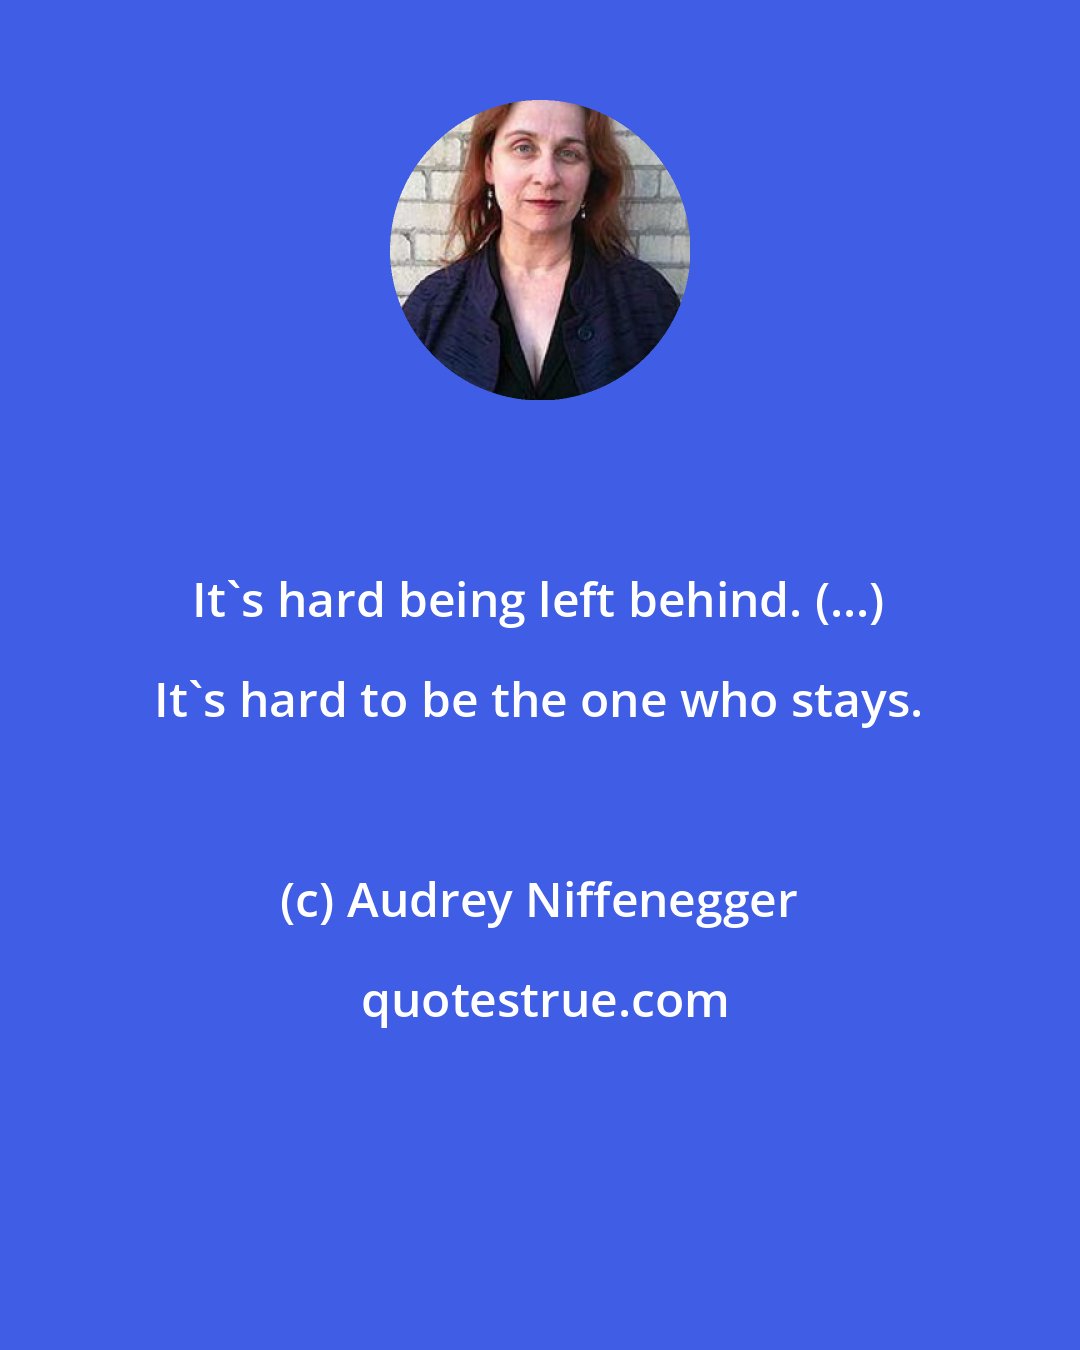 Audrey Niffenegger: It's hard being left behind. (...) It's hard to be the one who stays.